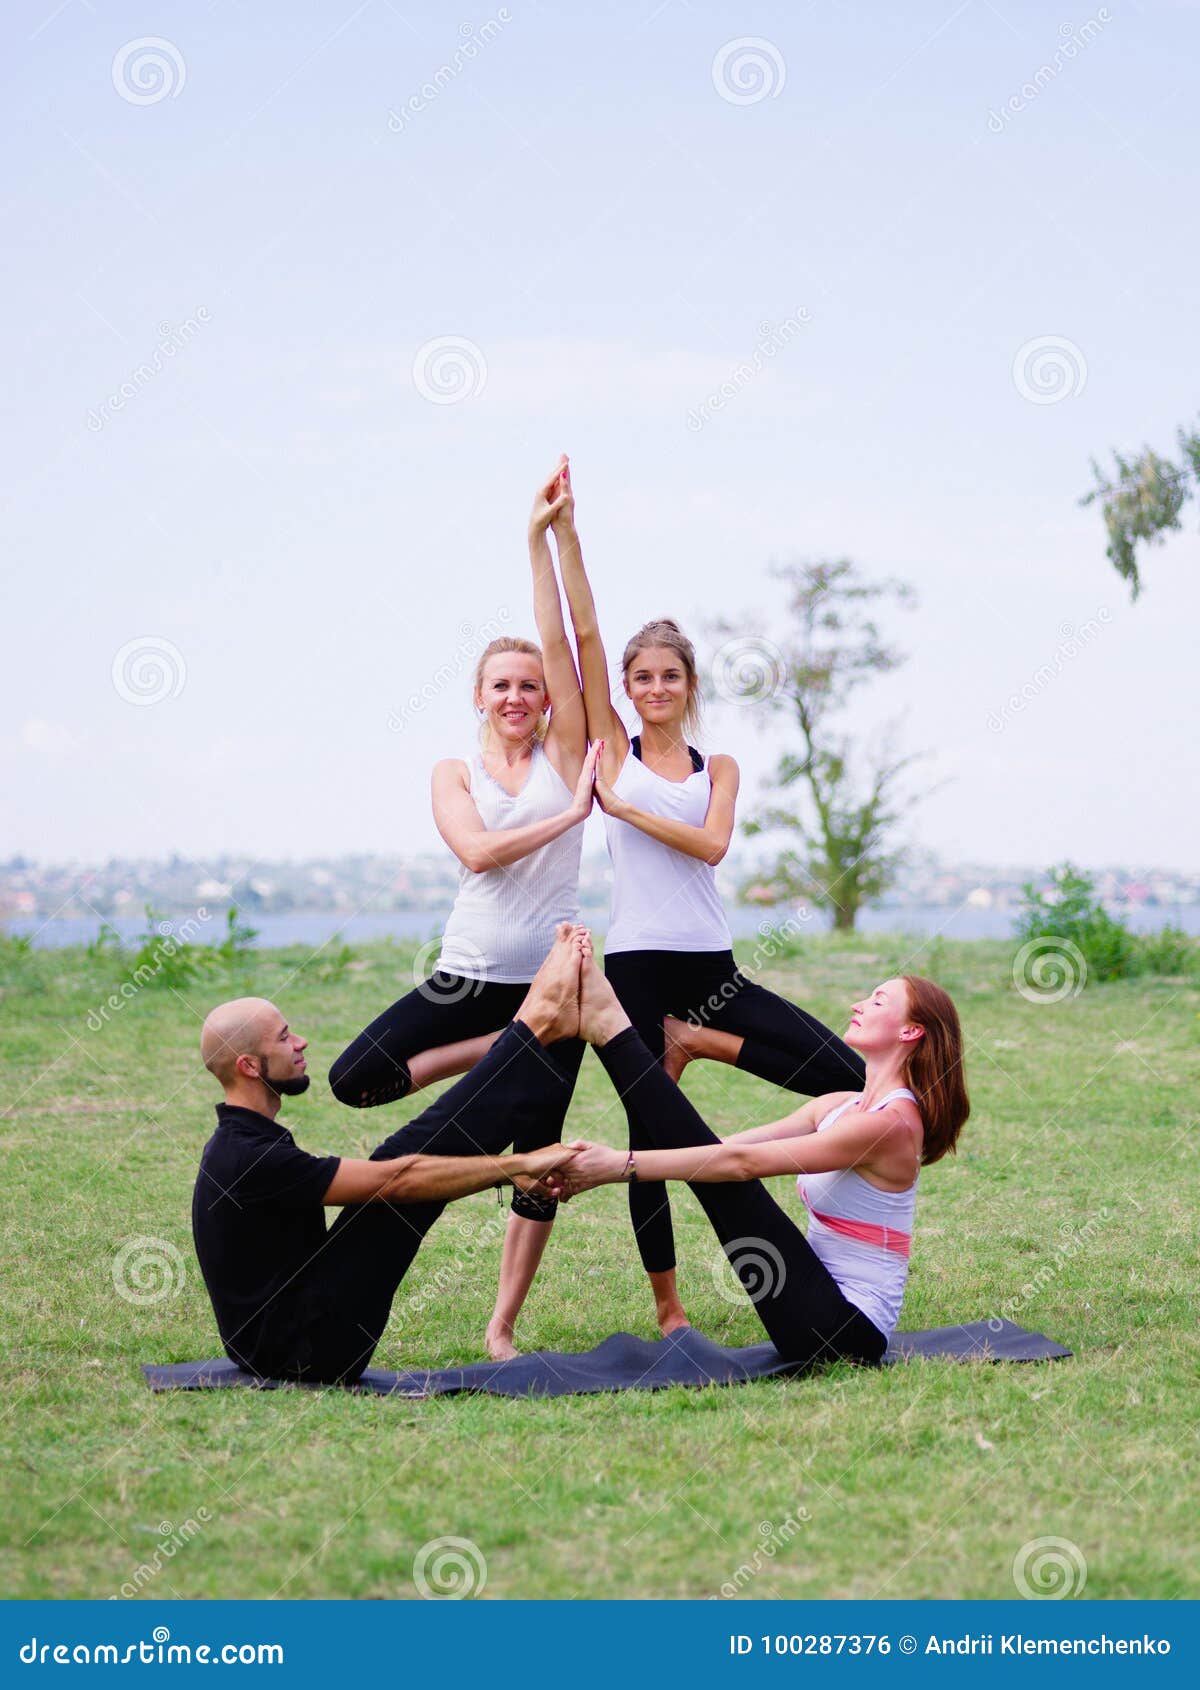 A Group of Four Holds Yoga Classes in the Park. Healthy Lifestyle